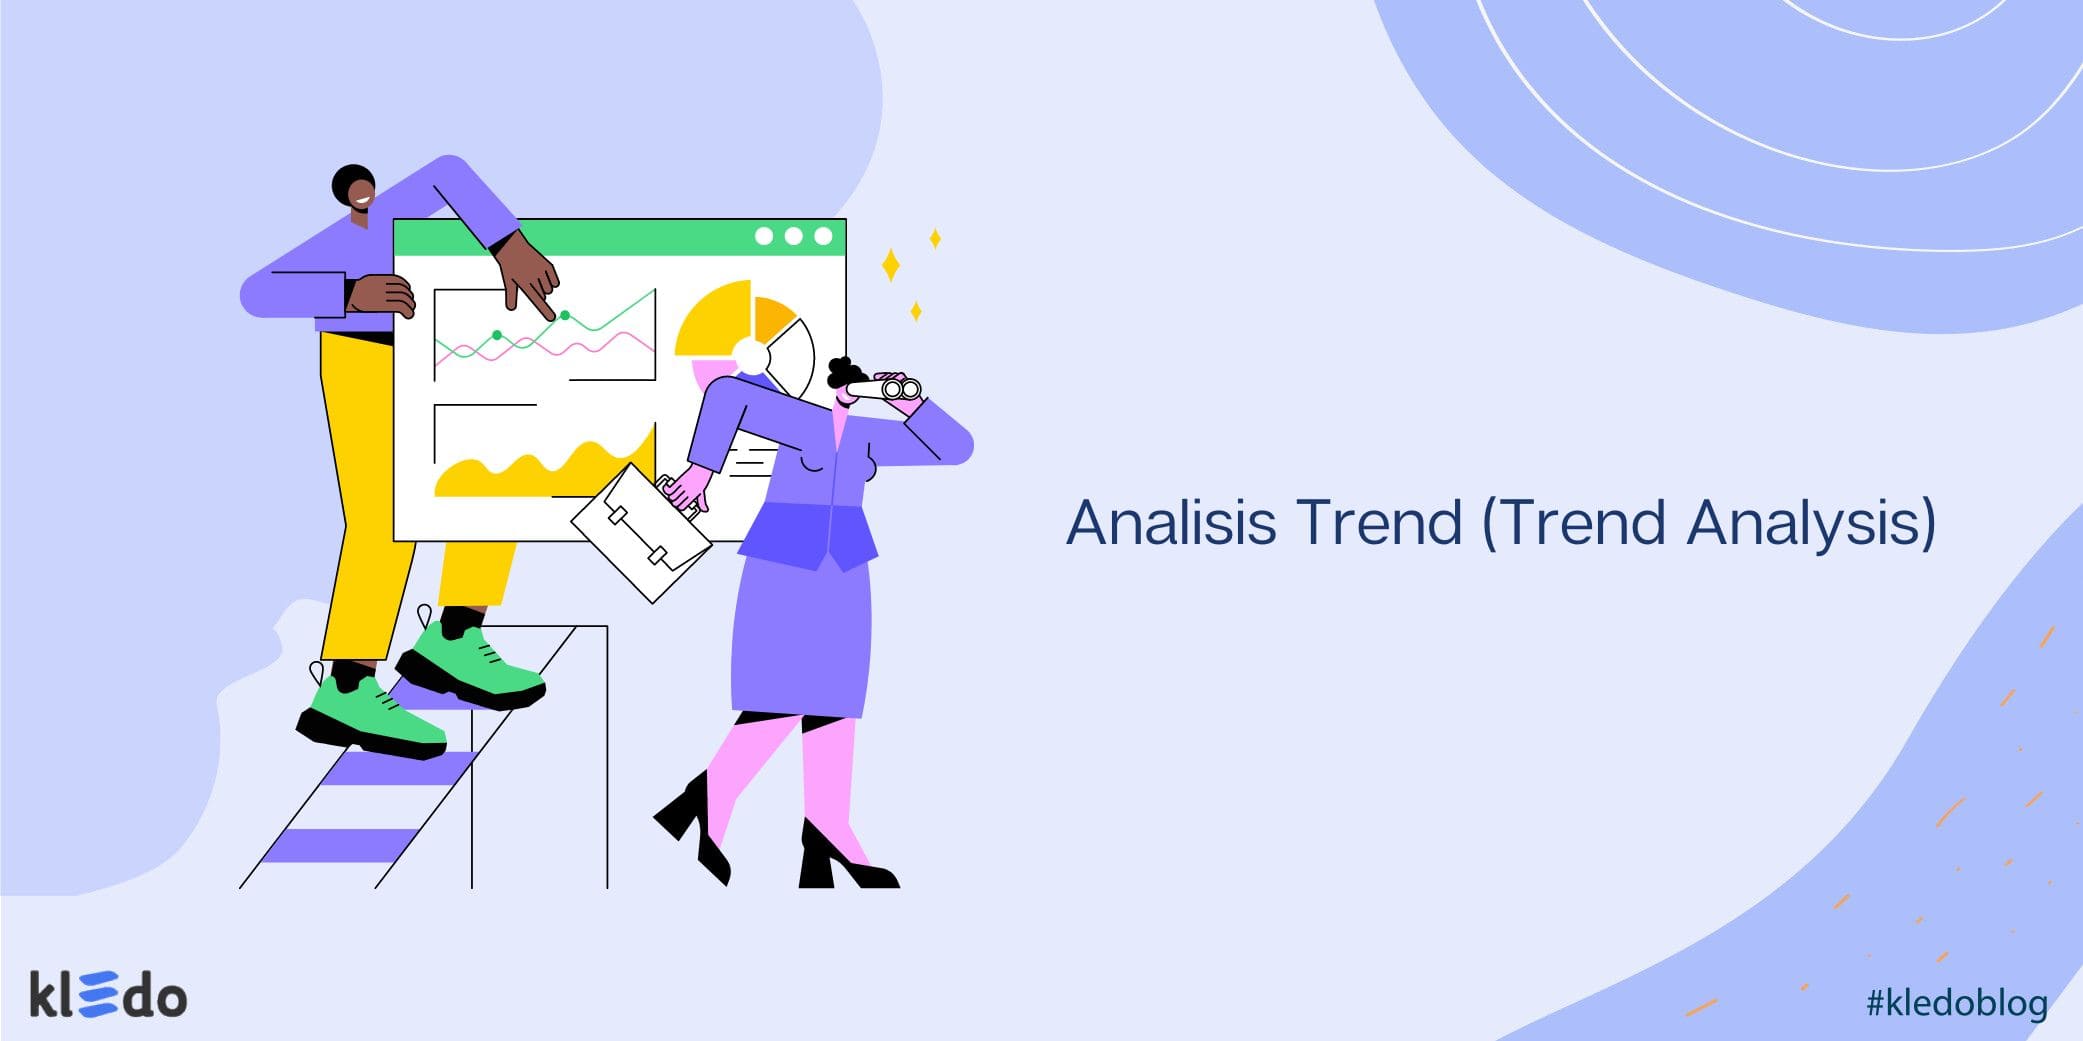 Analisis trend